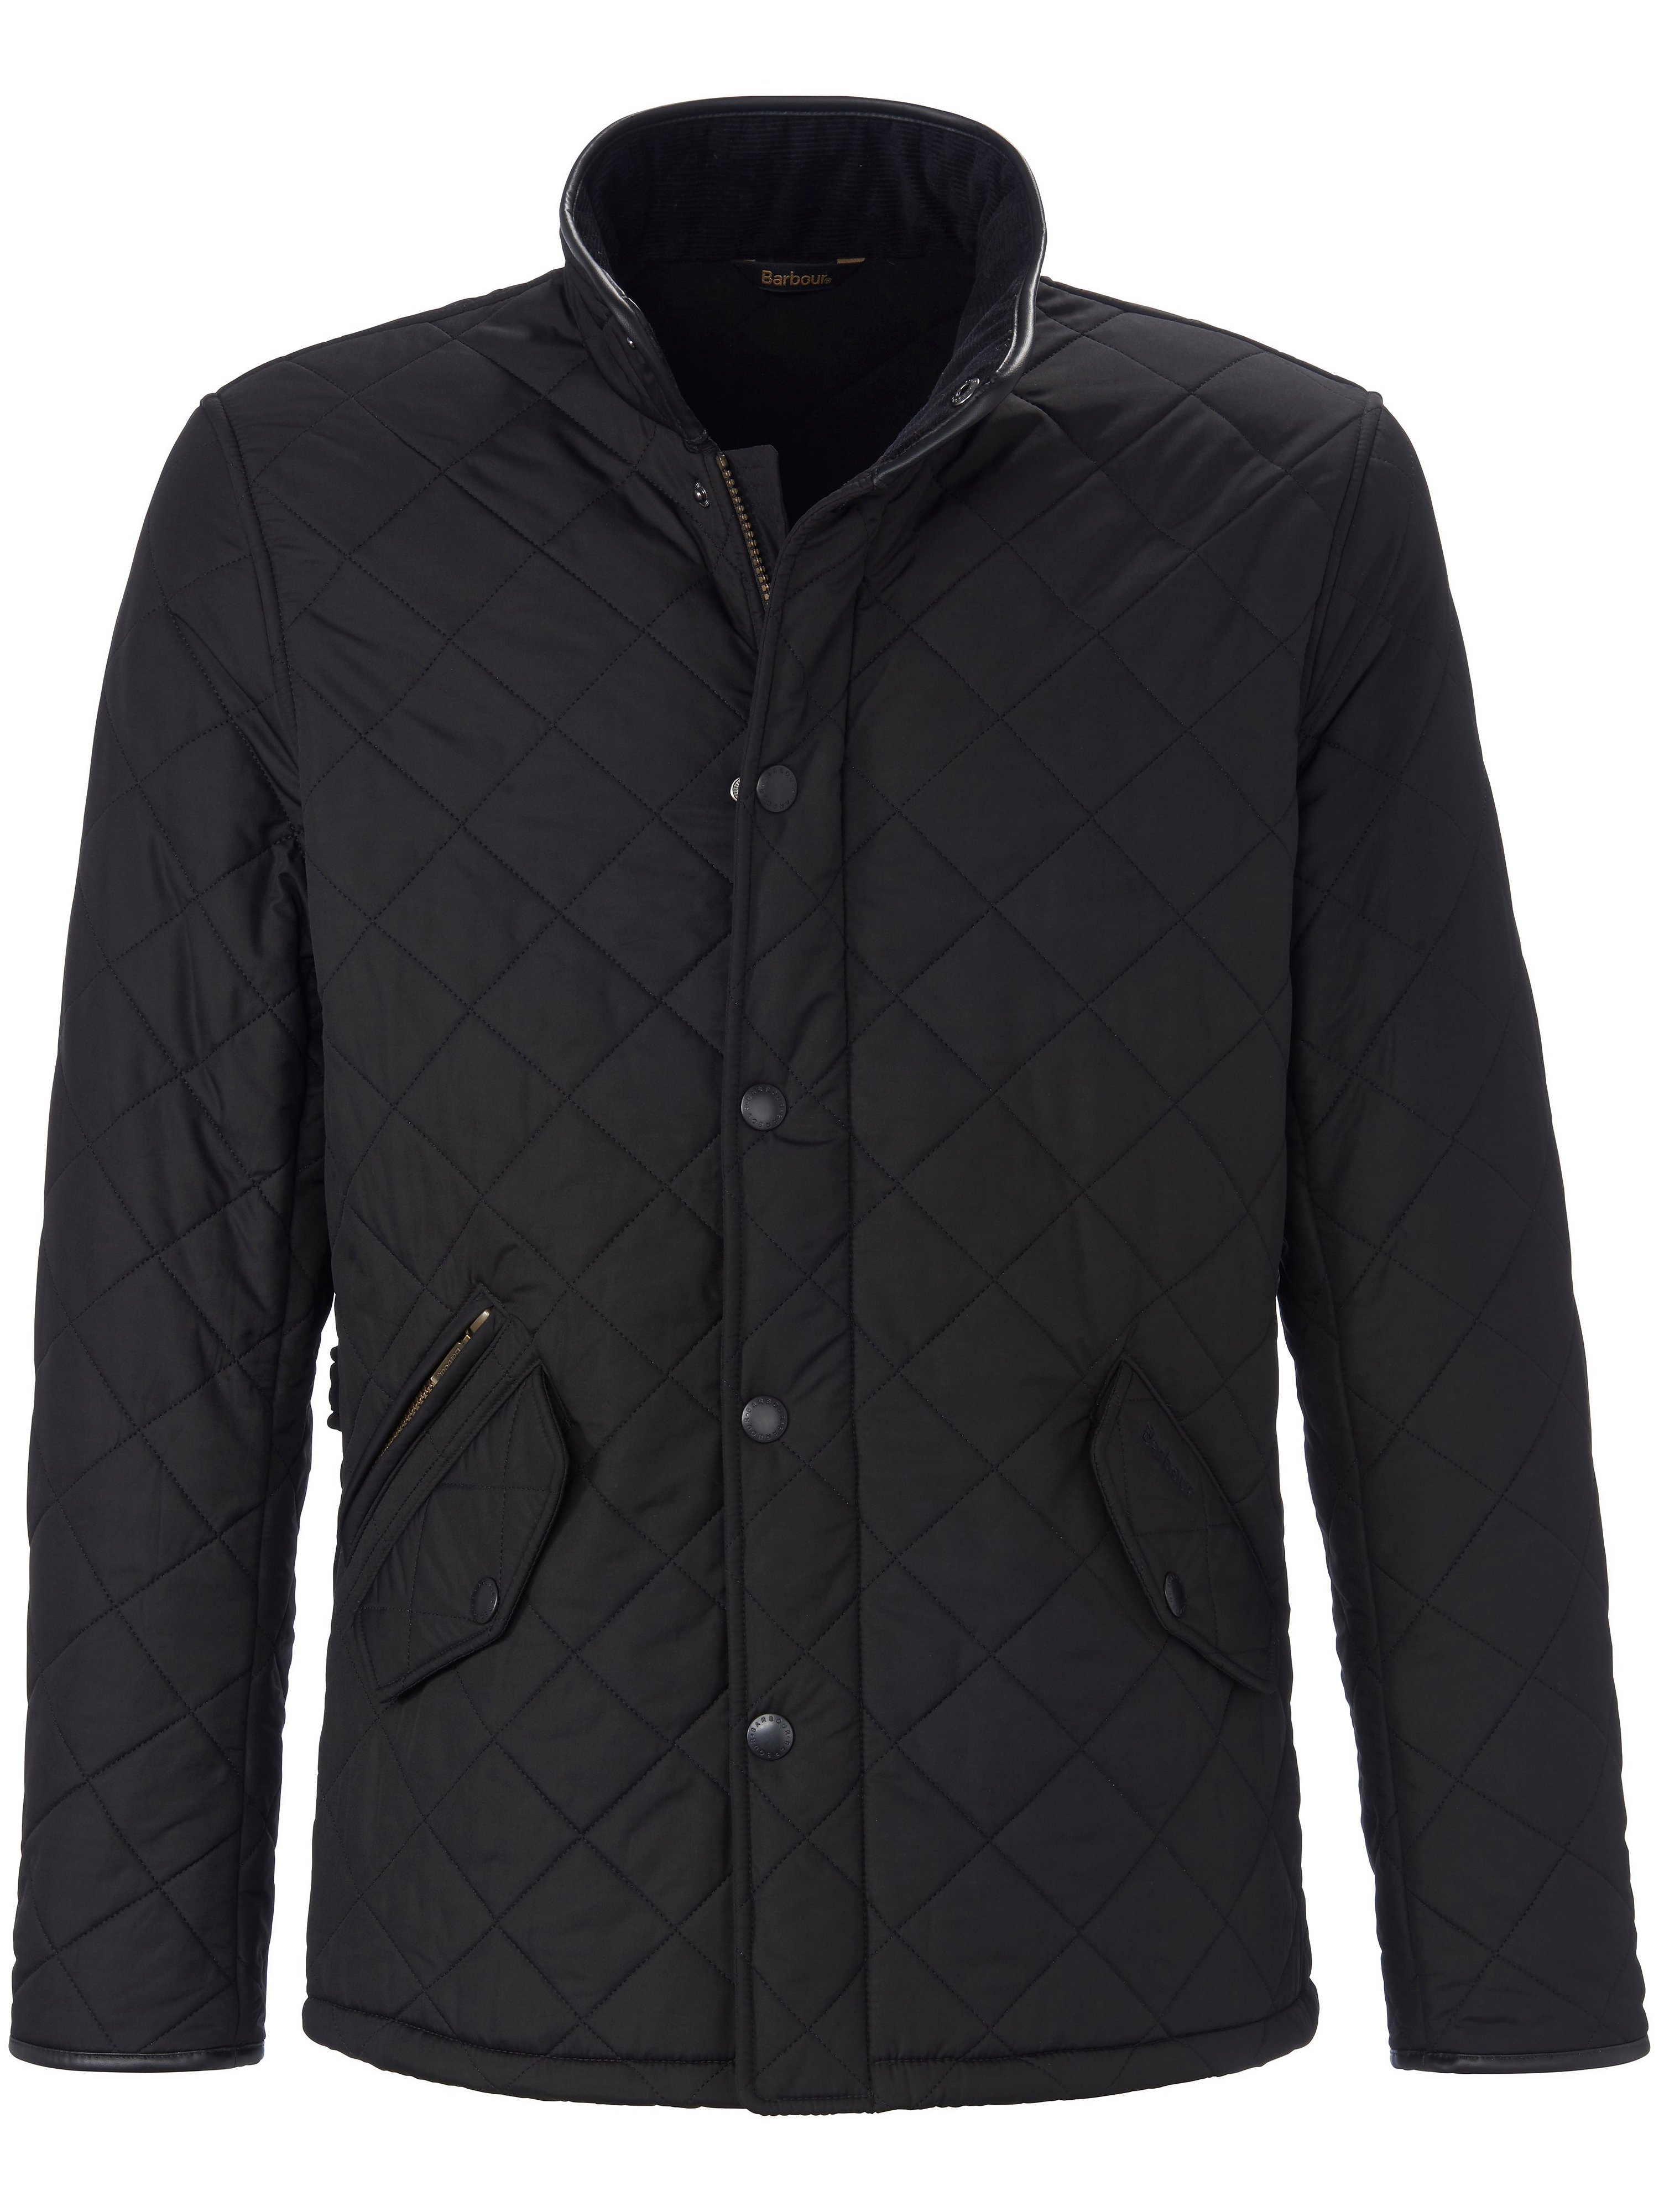 Quilted jacket Barbour black